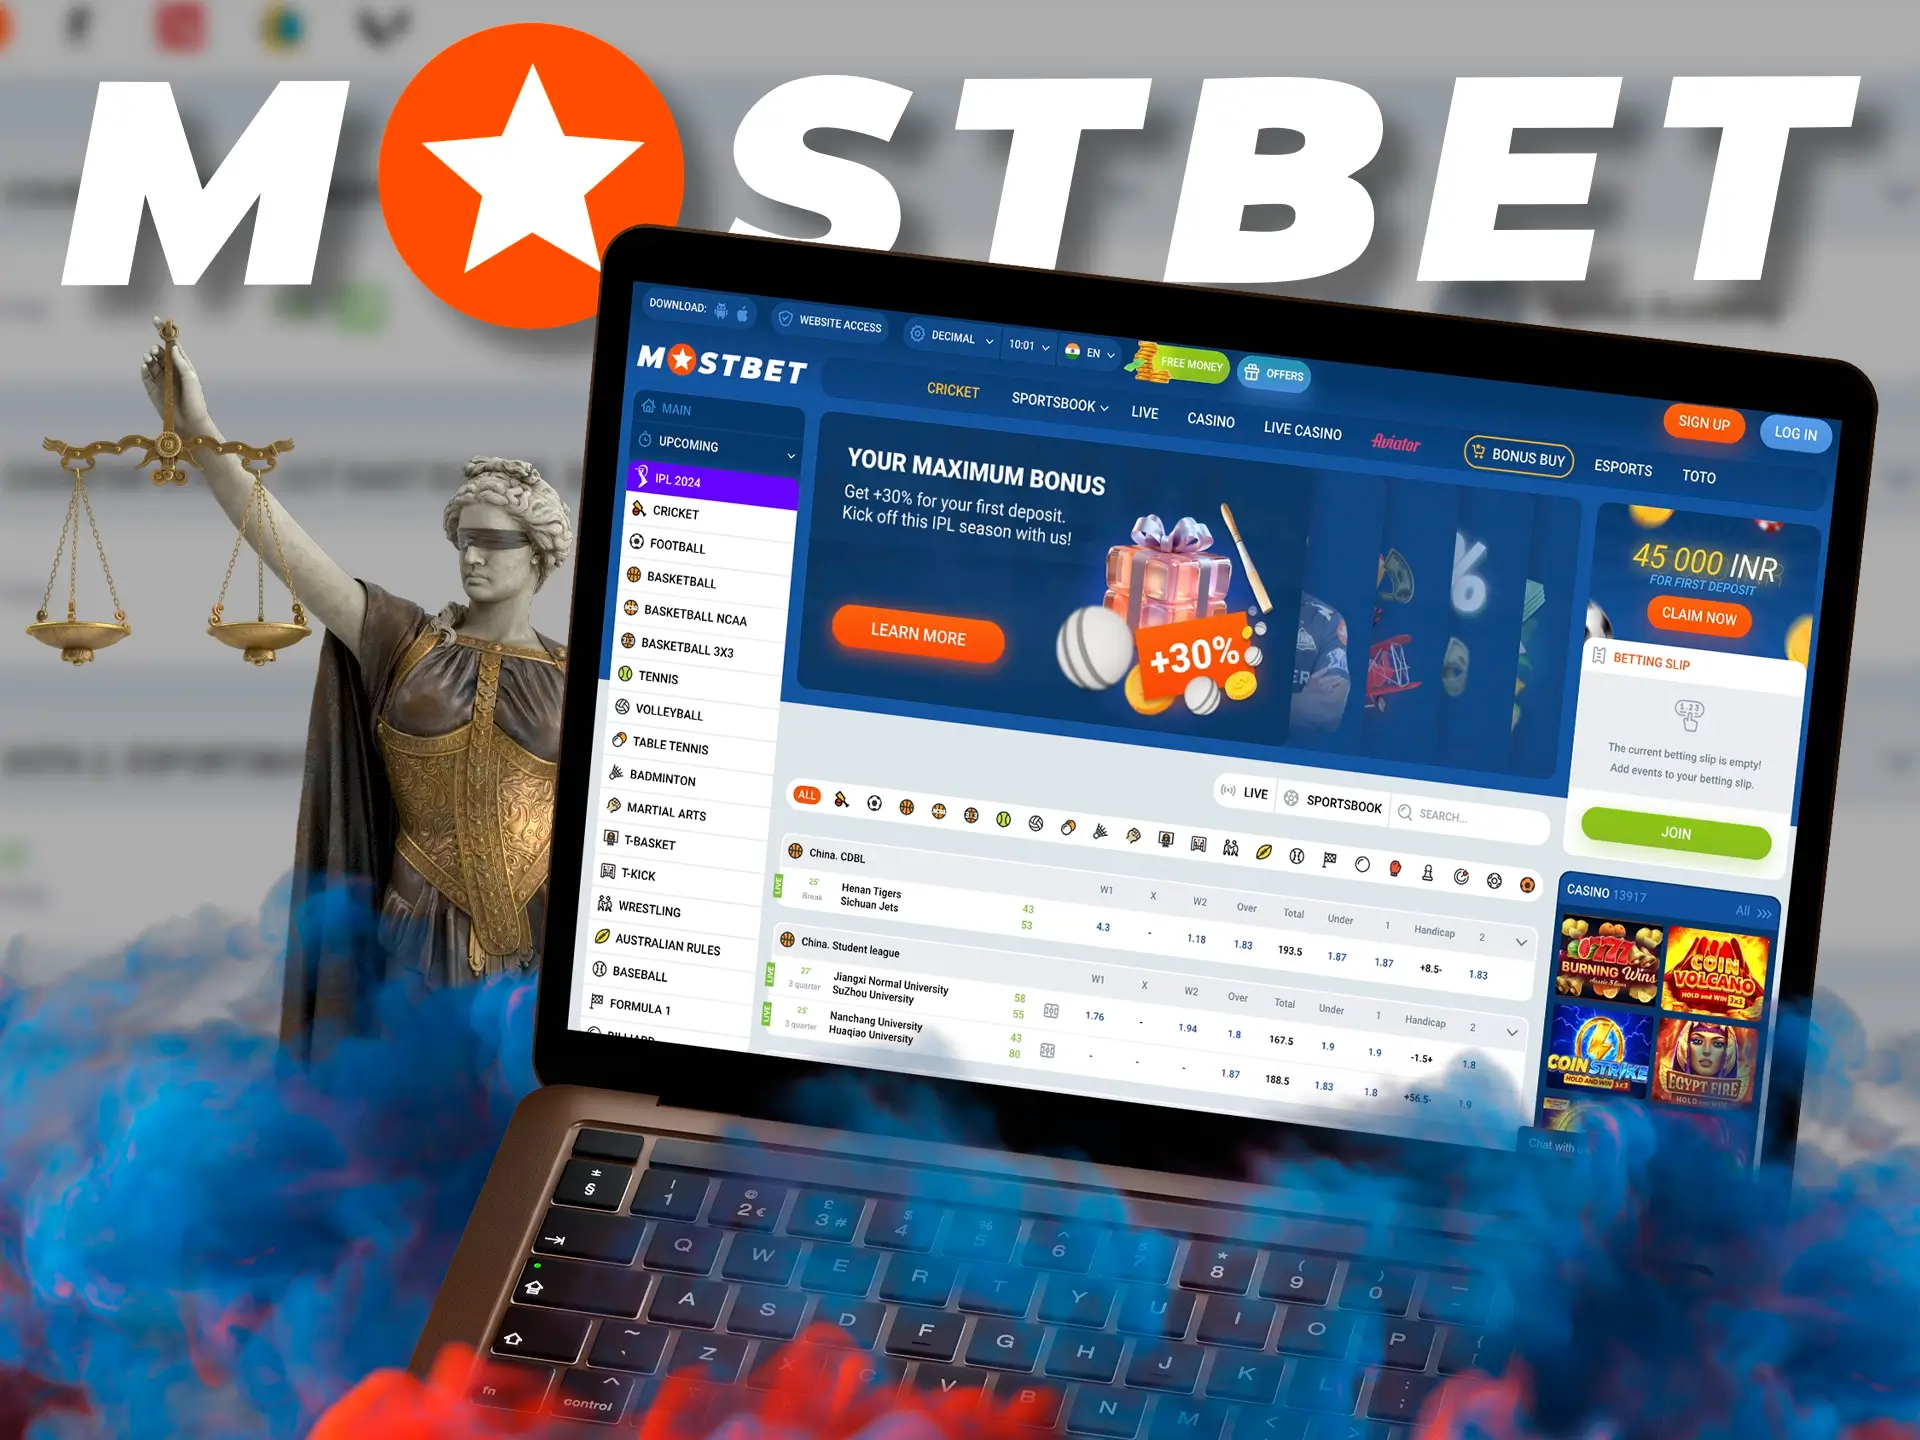 Use Mostbet Casino and don't worry, as gambling is fully legal.